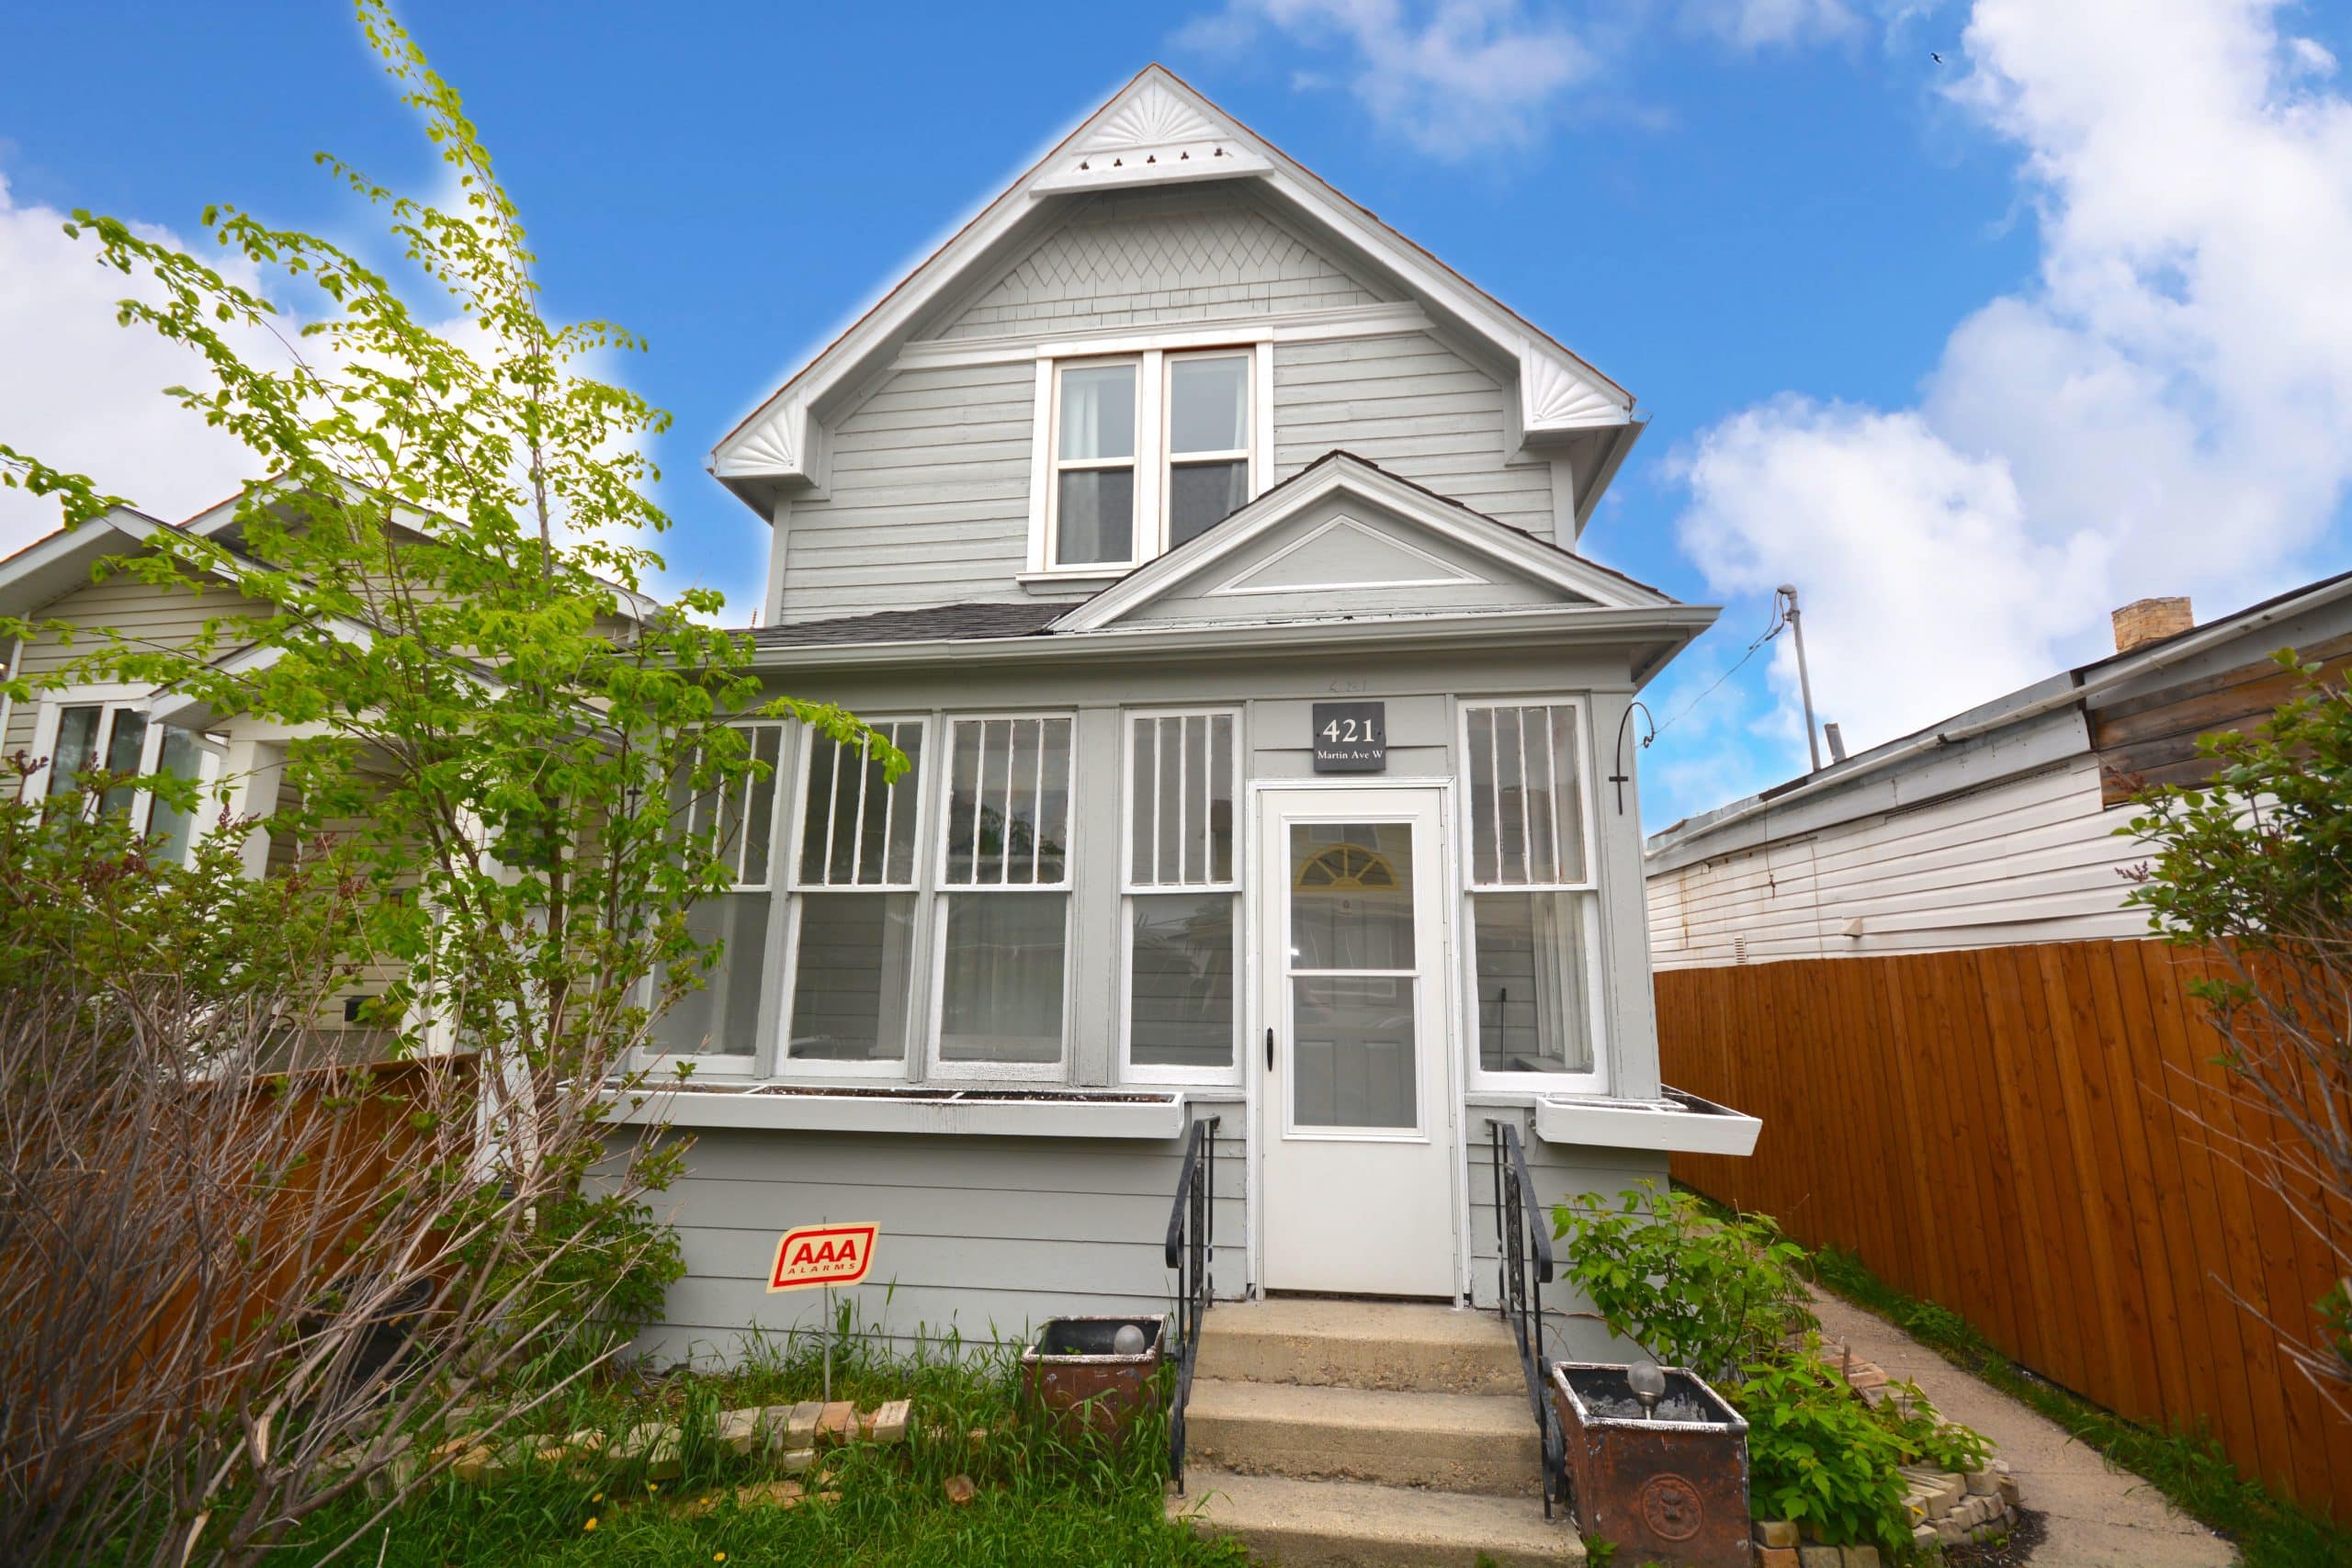 Martin Ave W – Elmwood Home for sale